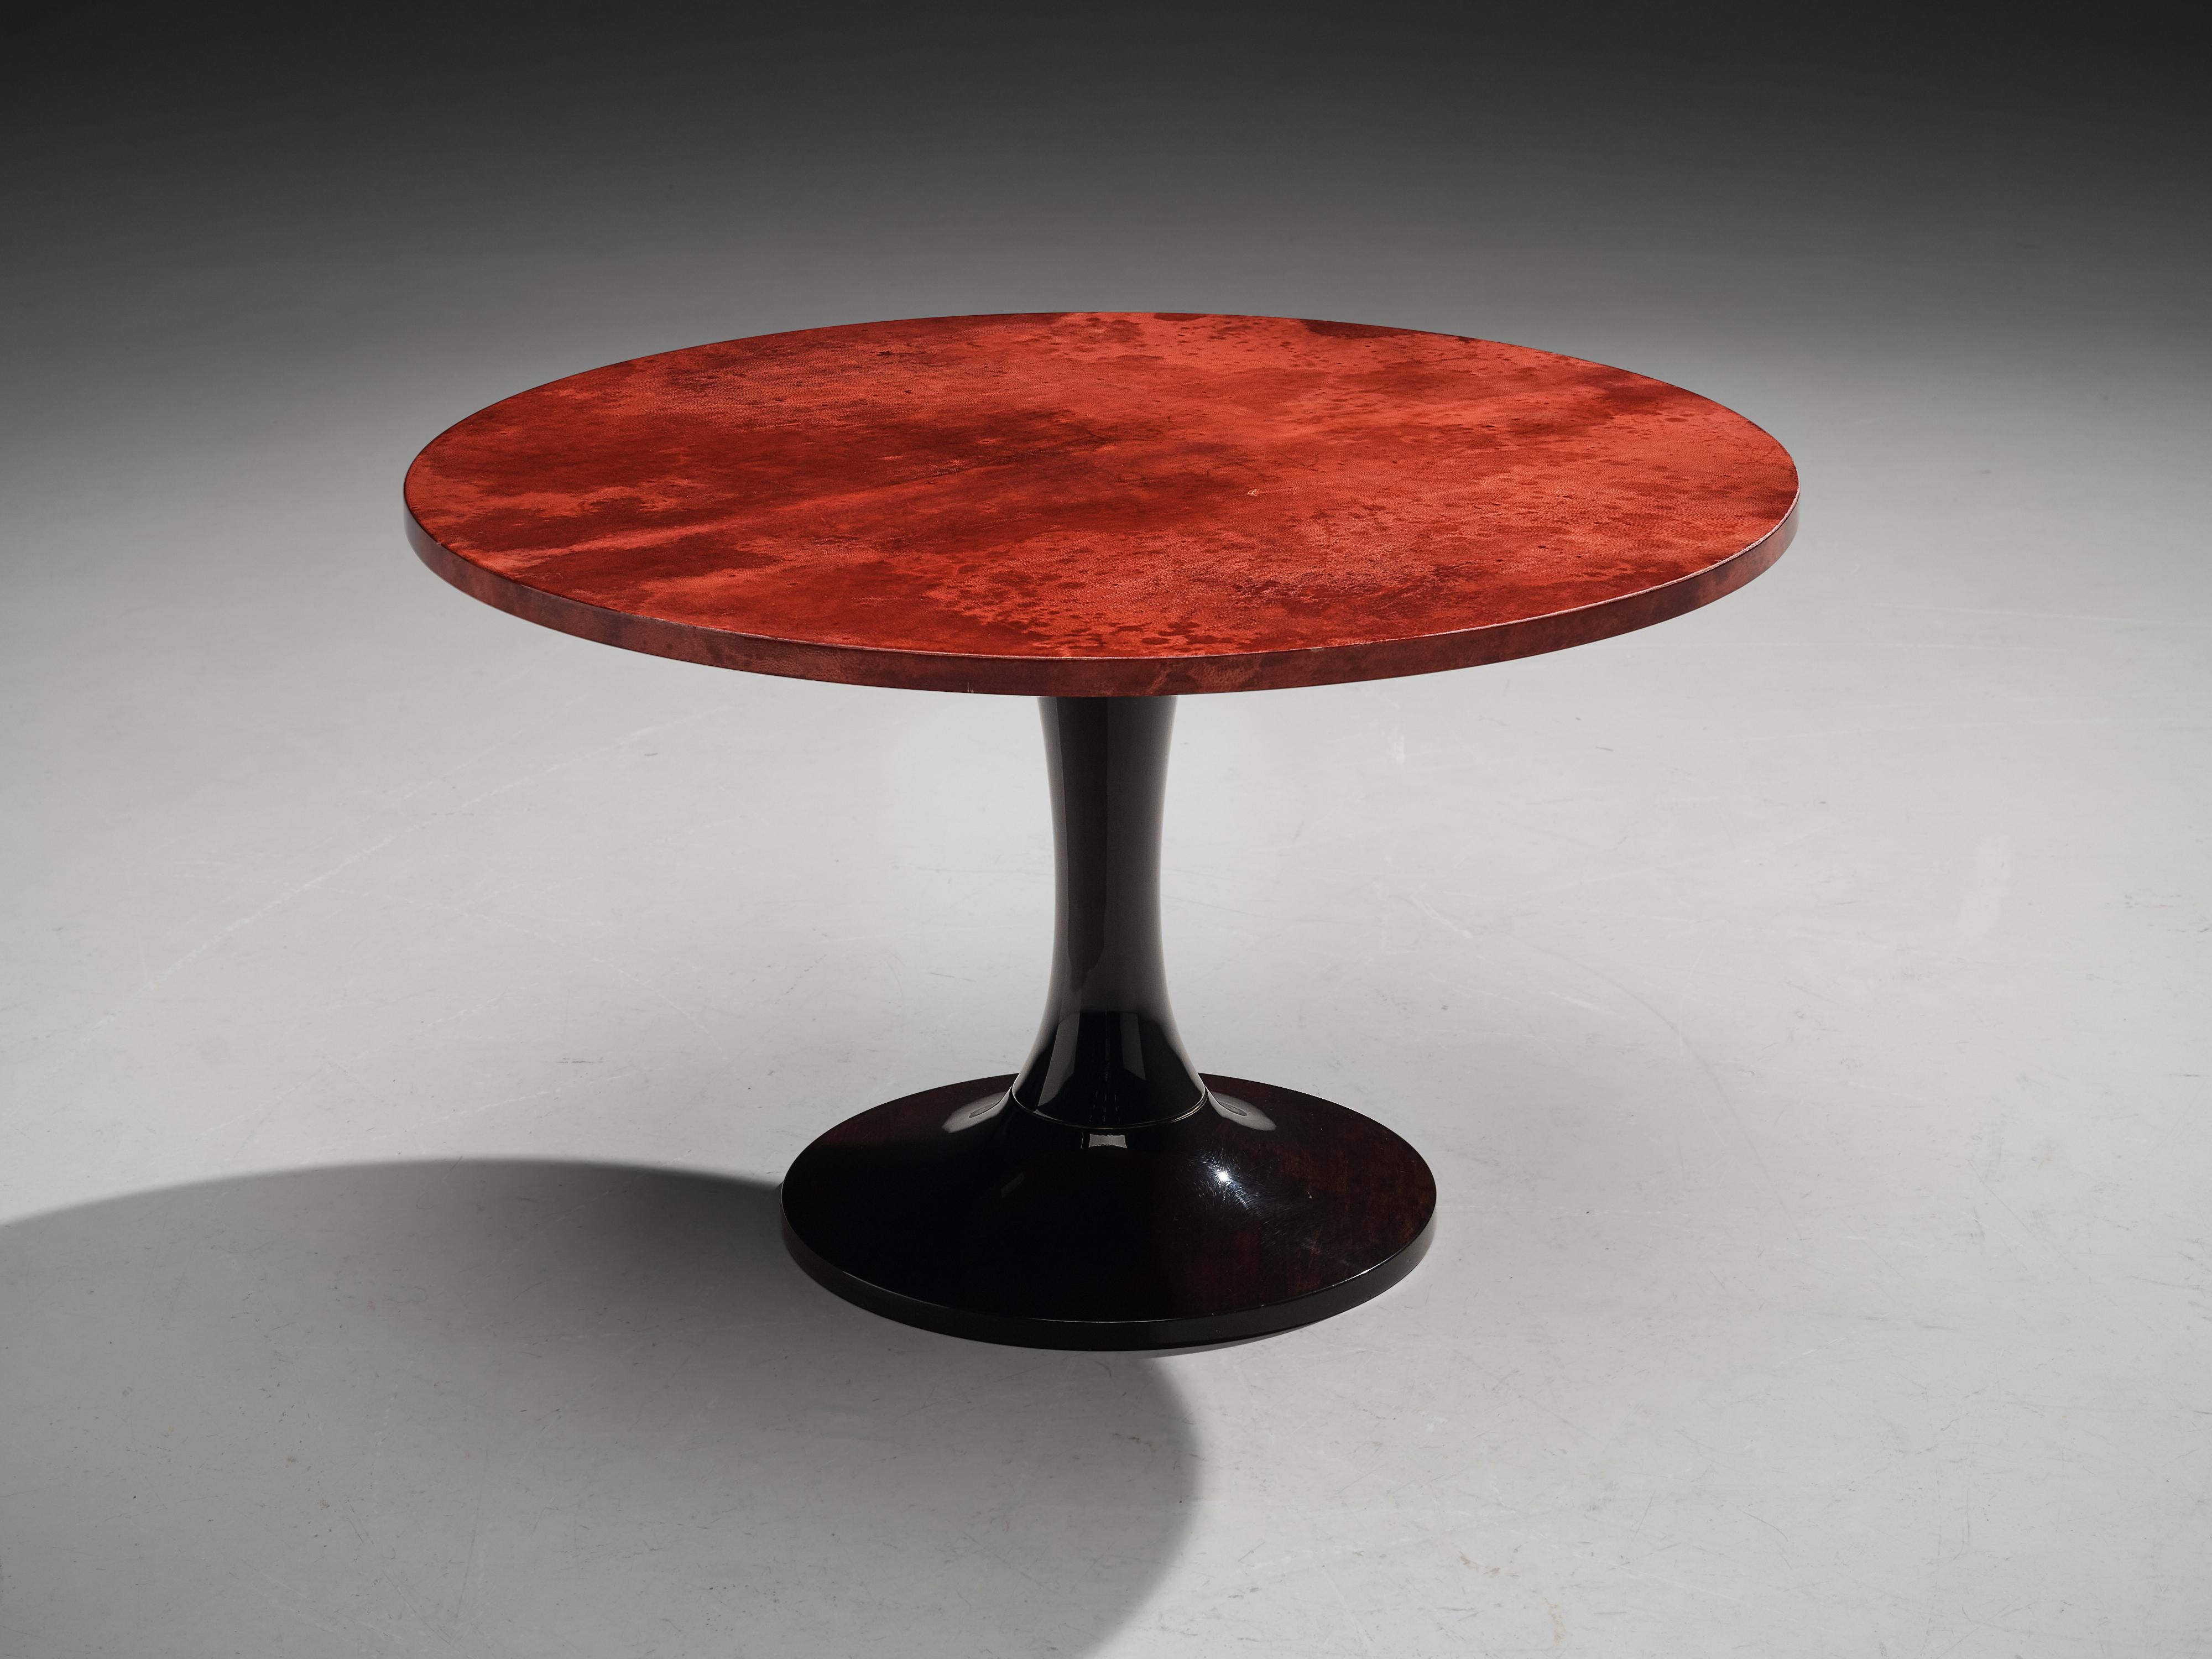 Aldo Tura, side table, wood, goatskin parchment, Italy, 1950s

Italian designer Aldo Tura (1909-1963) is known for his rather unique style that is characterized by the use and combination of uncommon materials and refined forms. His designs are